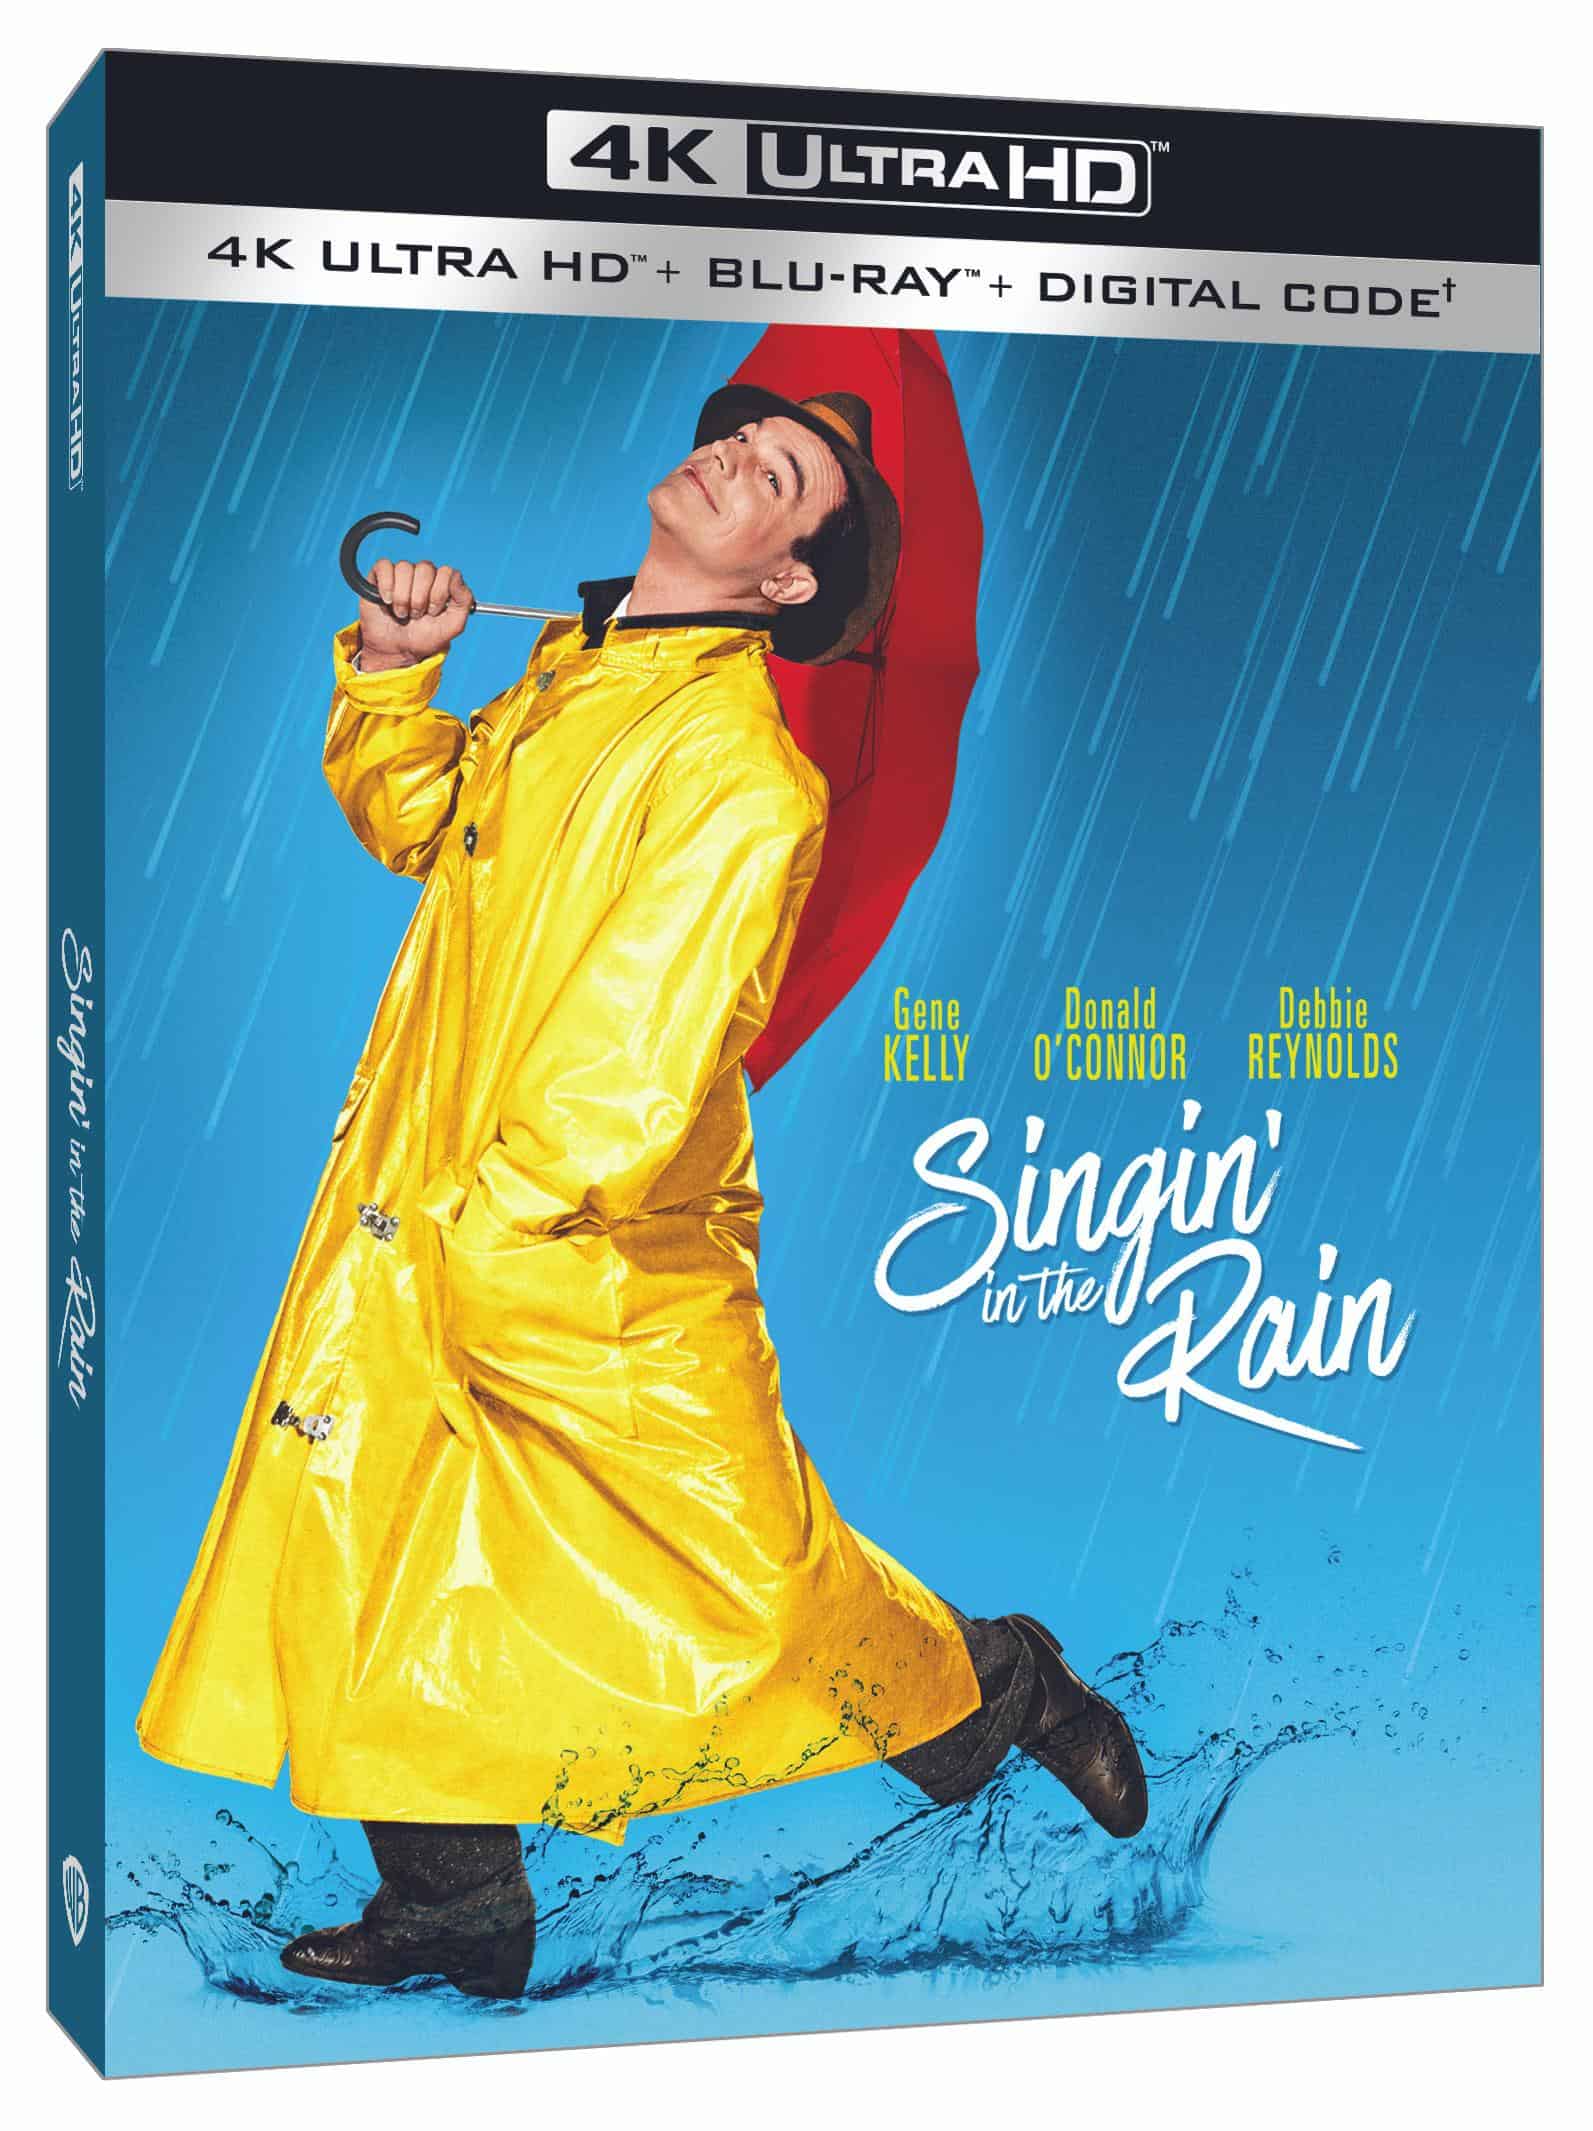 Singin in the Rain sings its way onto 4K UHD on April 26th 19